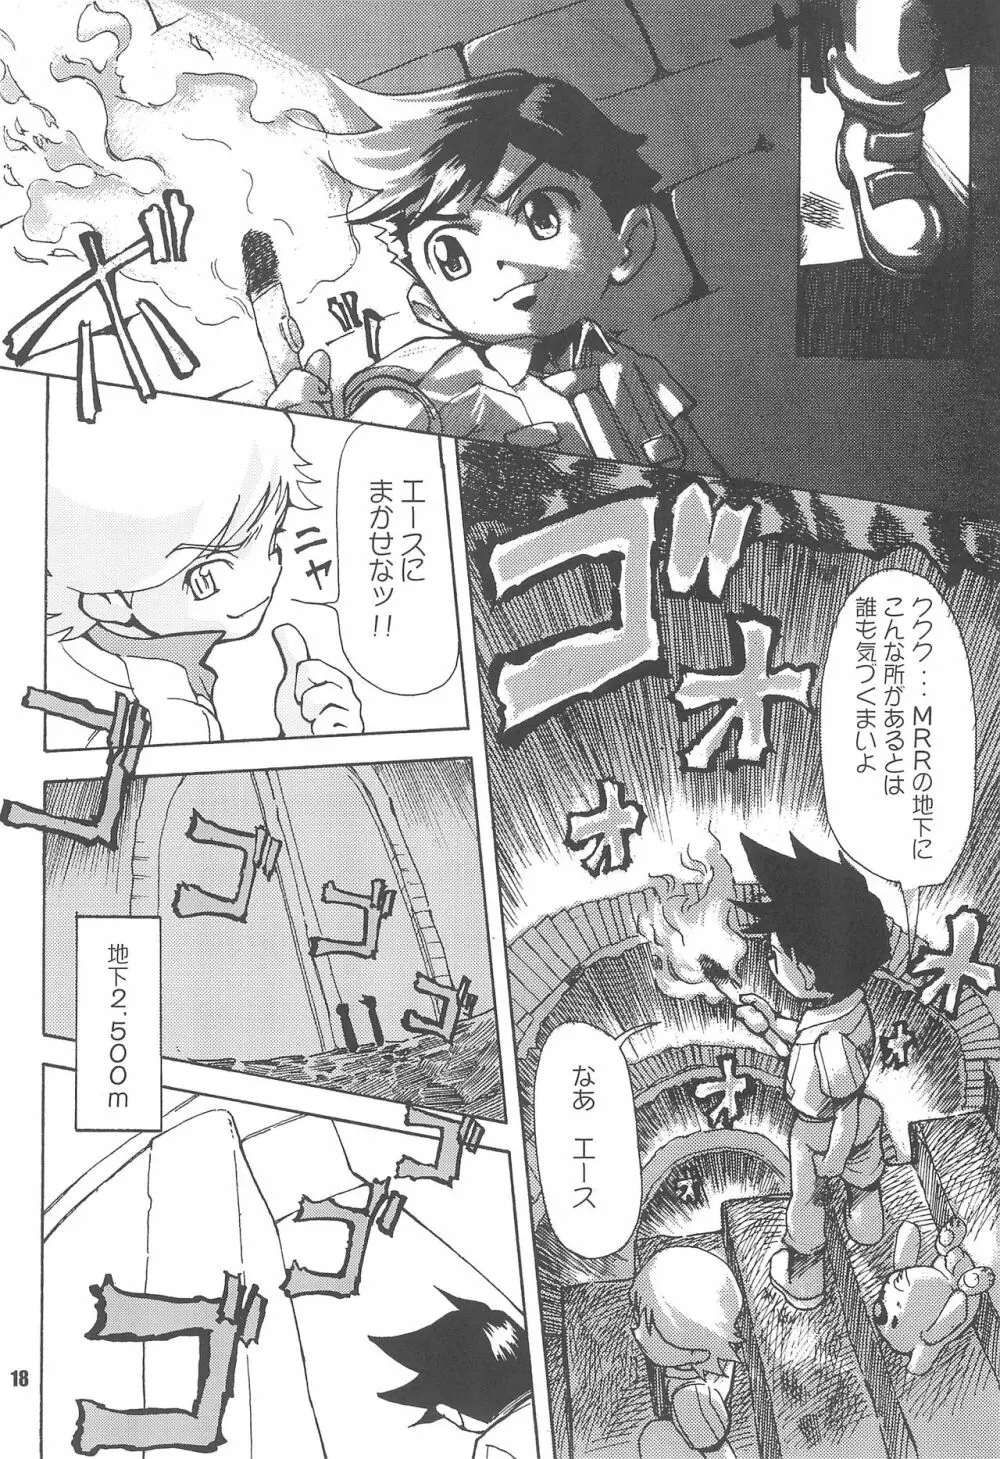 S.A.R -Search And Rescue- - page18